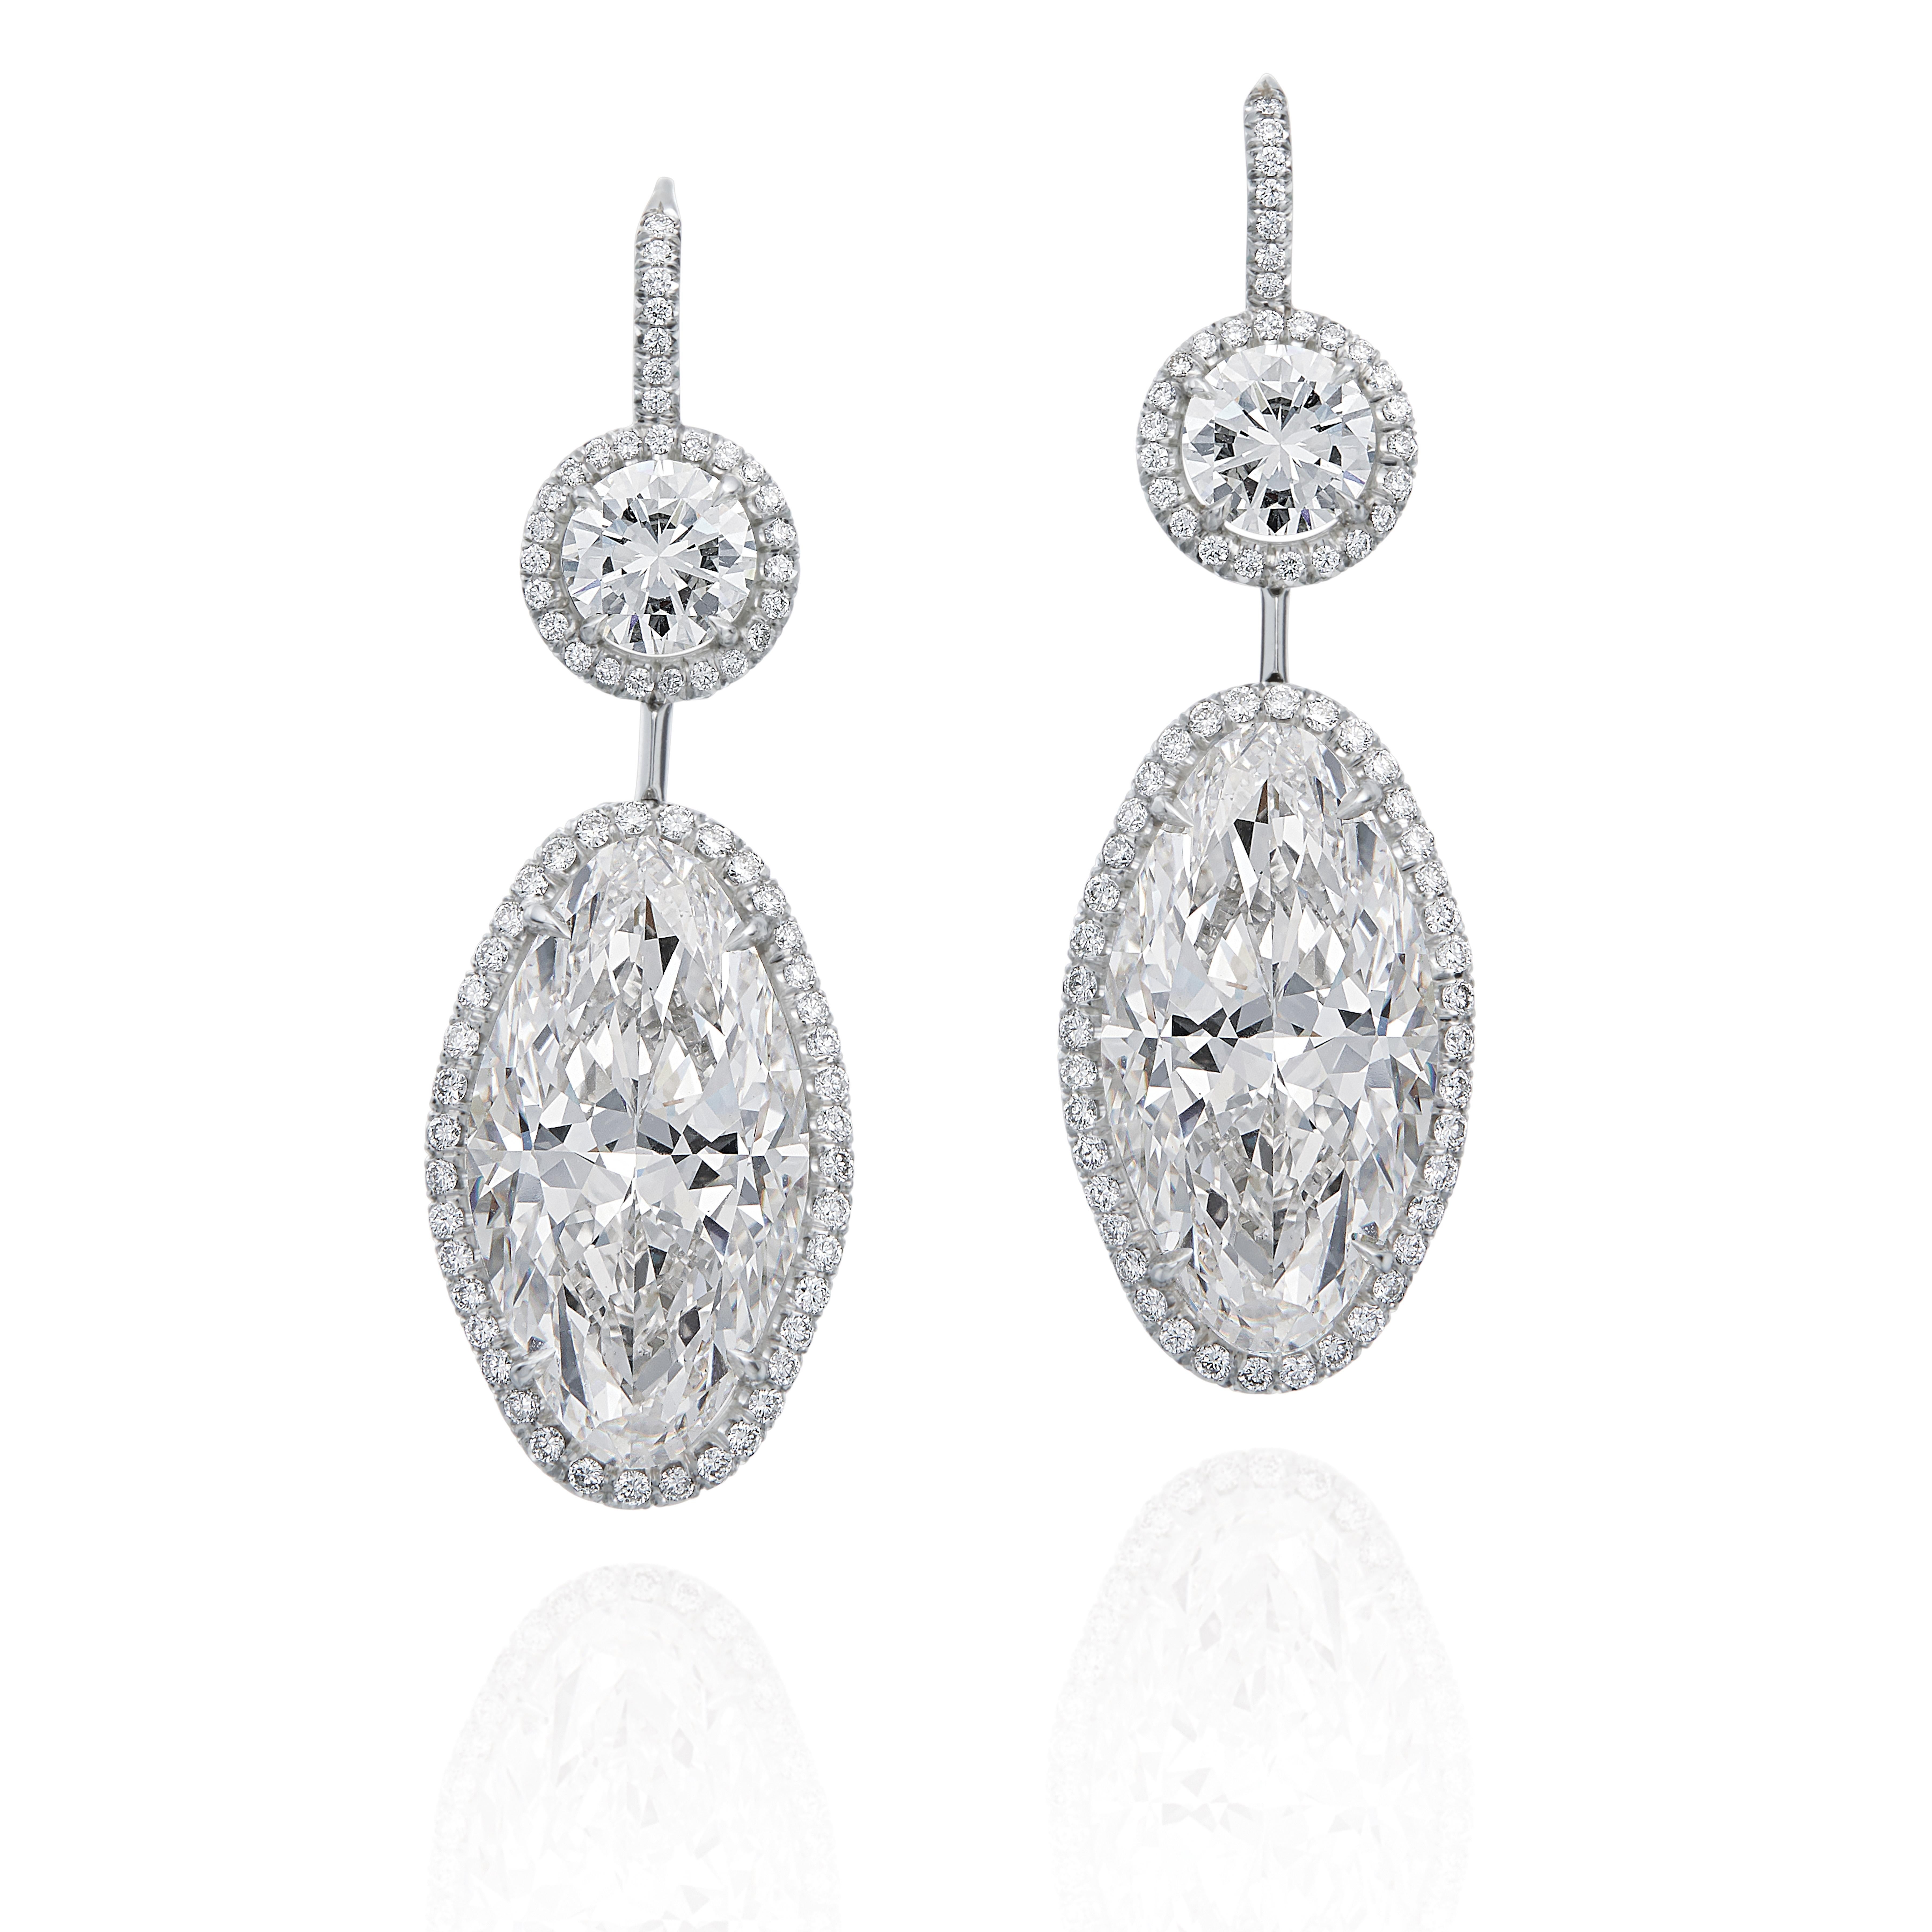 Diana  M.  Platinum fashion earrings 33.44cts Moval  shape earrings  In New Condition For Sale In New York, NY